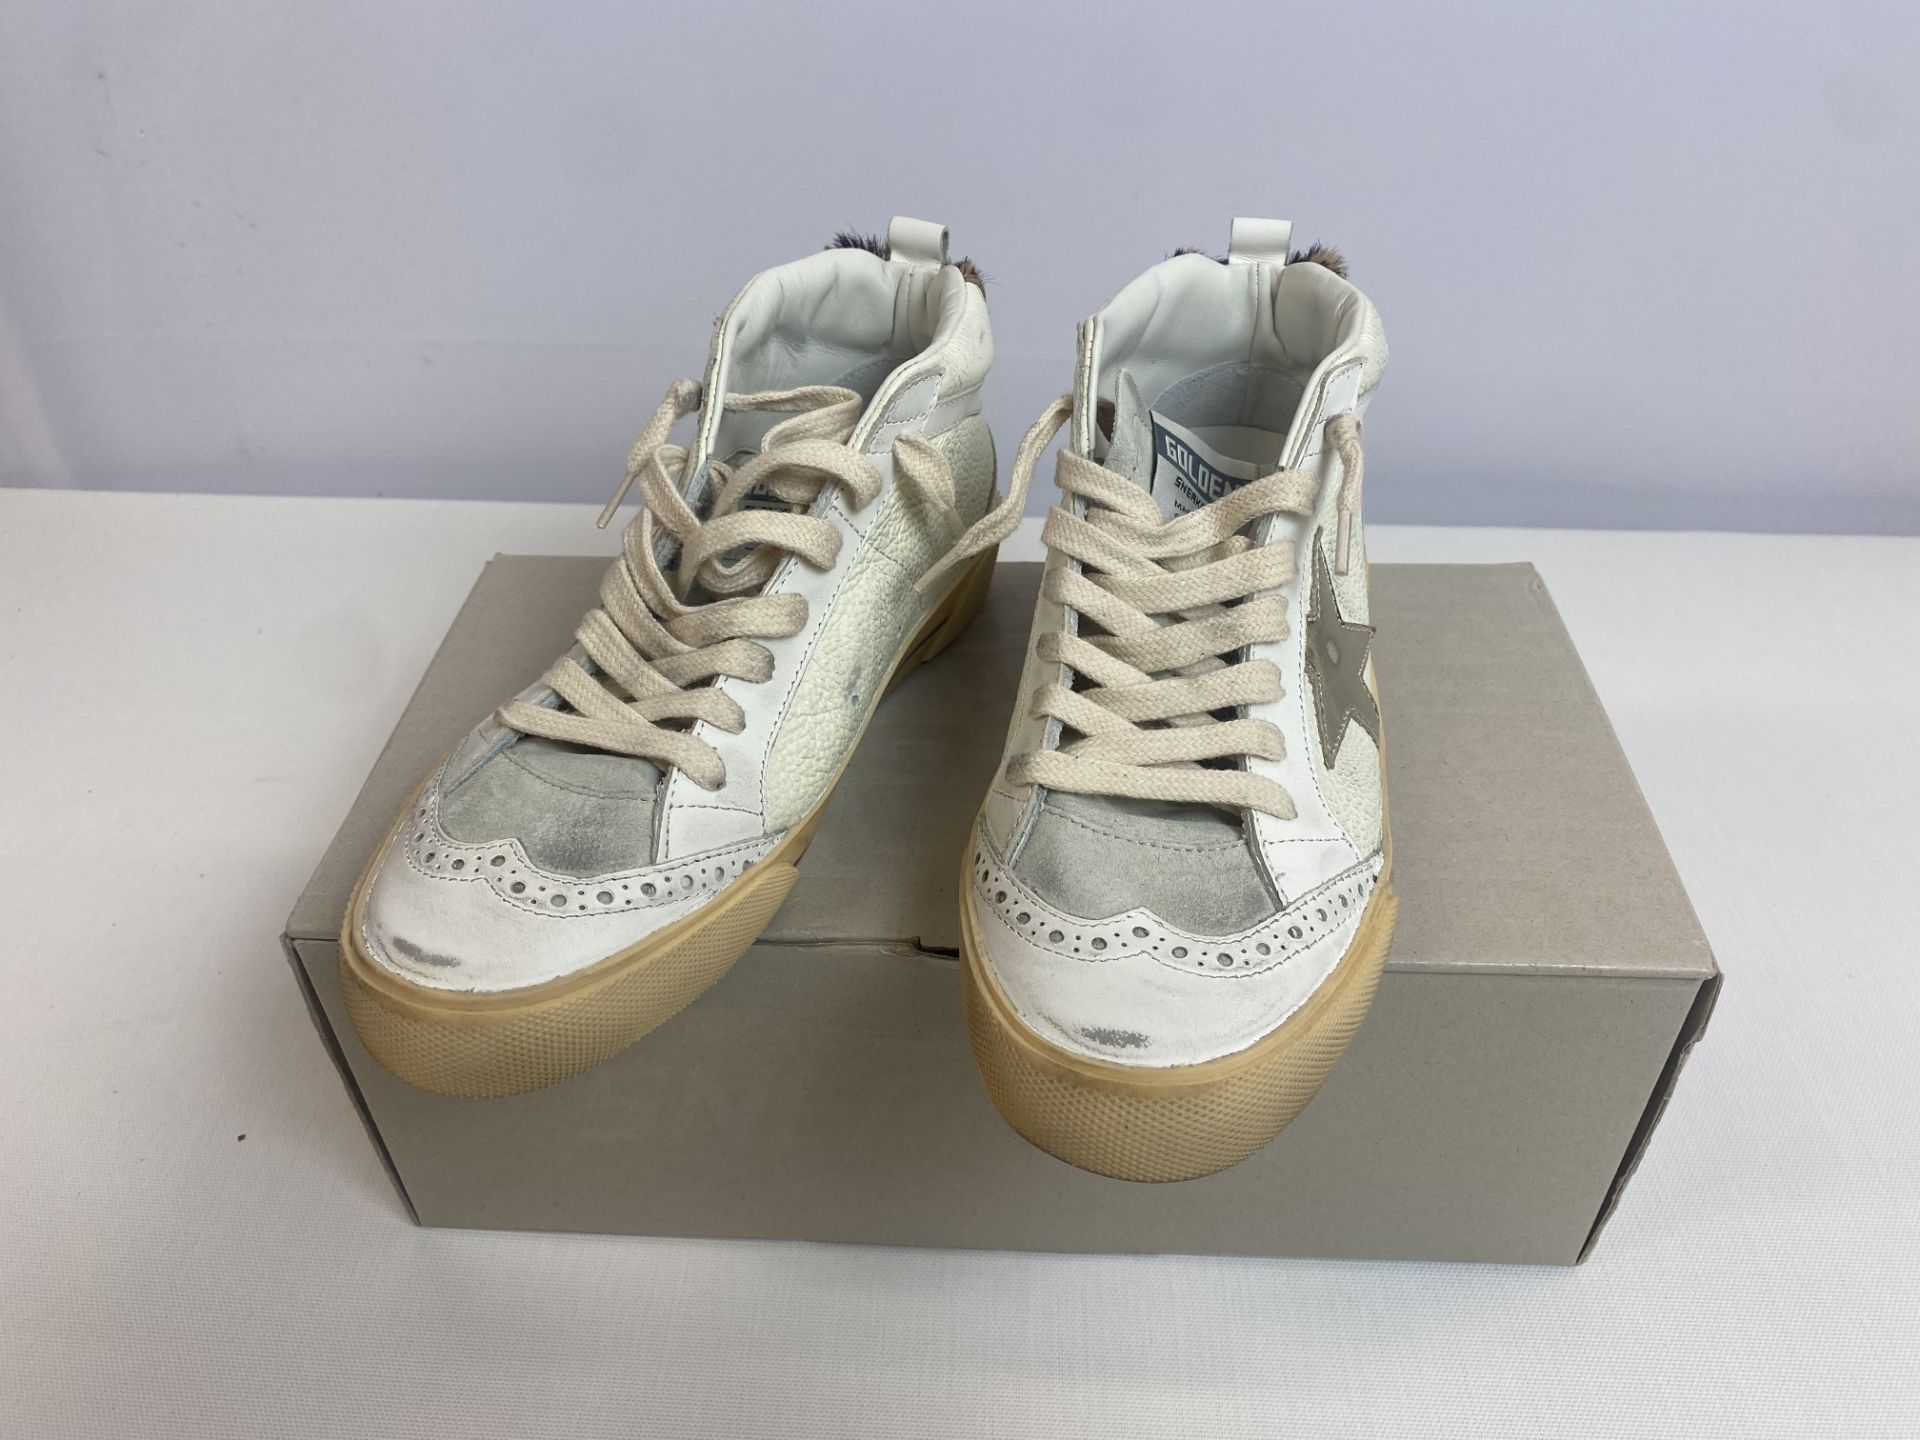 Golden Goose SNKR MIDSTAR SIMID STAR CLASSIC, Size: 36, Color: WHITE, Retail Price: $600 - Image 4 of 4